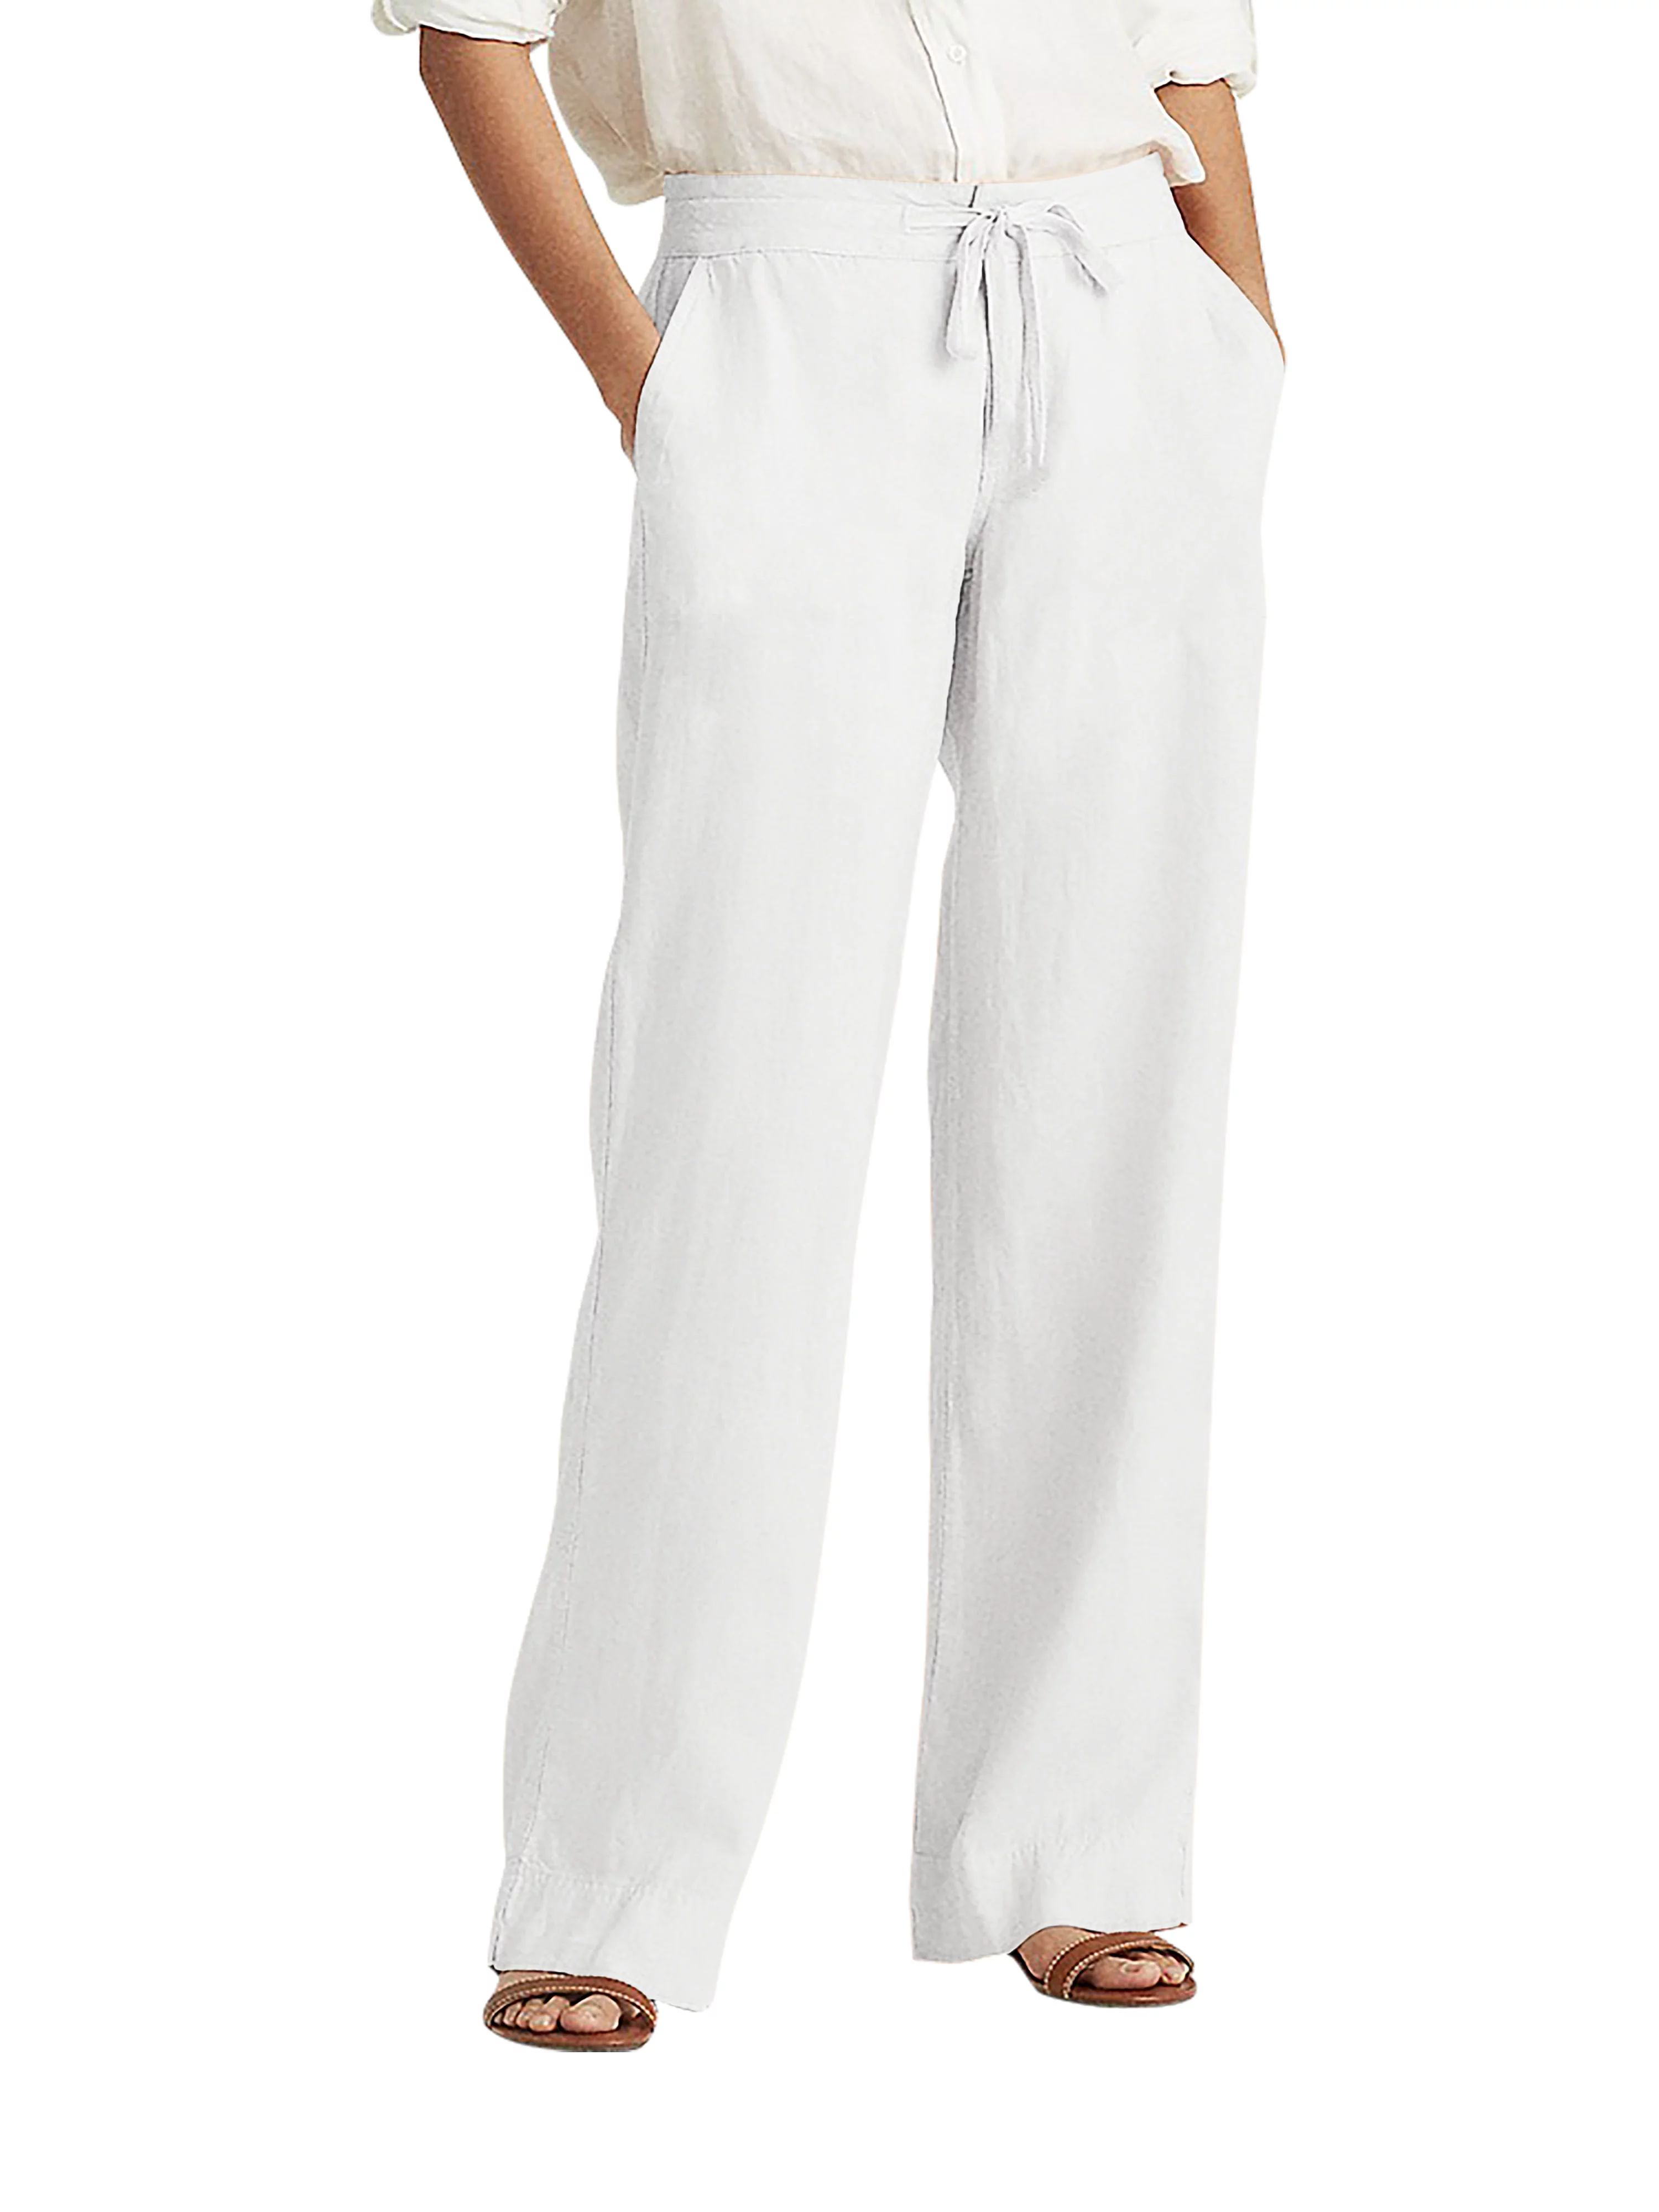 Ma CroixMa Croix Womens Premium Soft Linen Pants Relaxed Fit Comfort Wear for Daily StylingUSD$23... | Walmart (US)